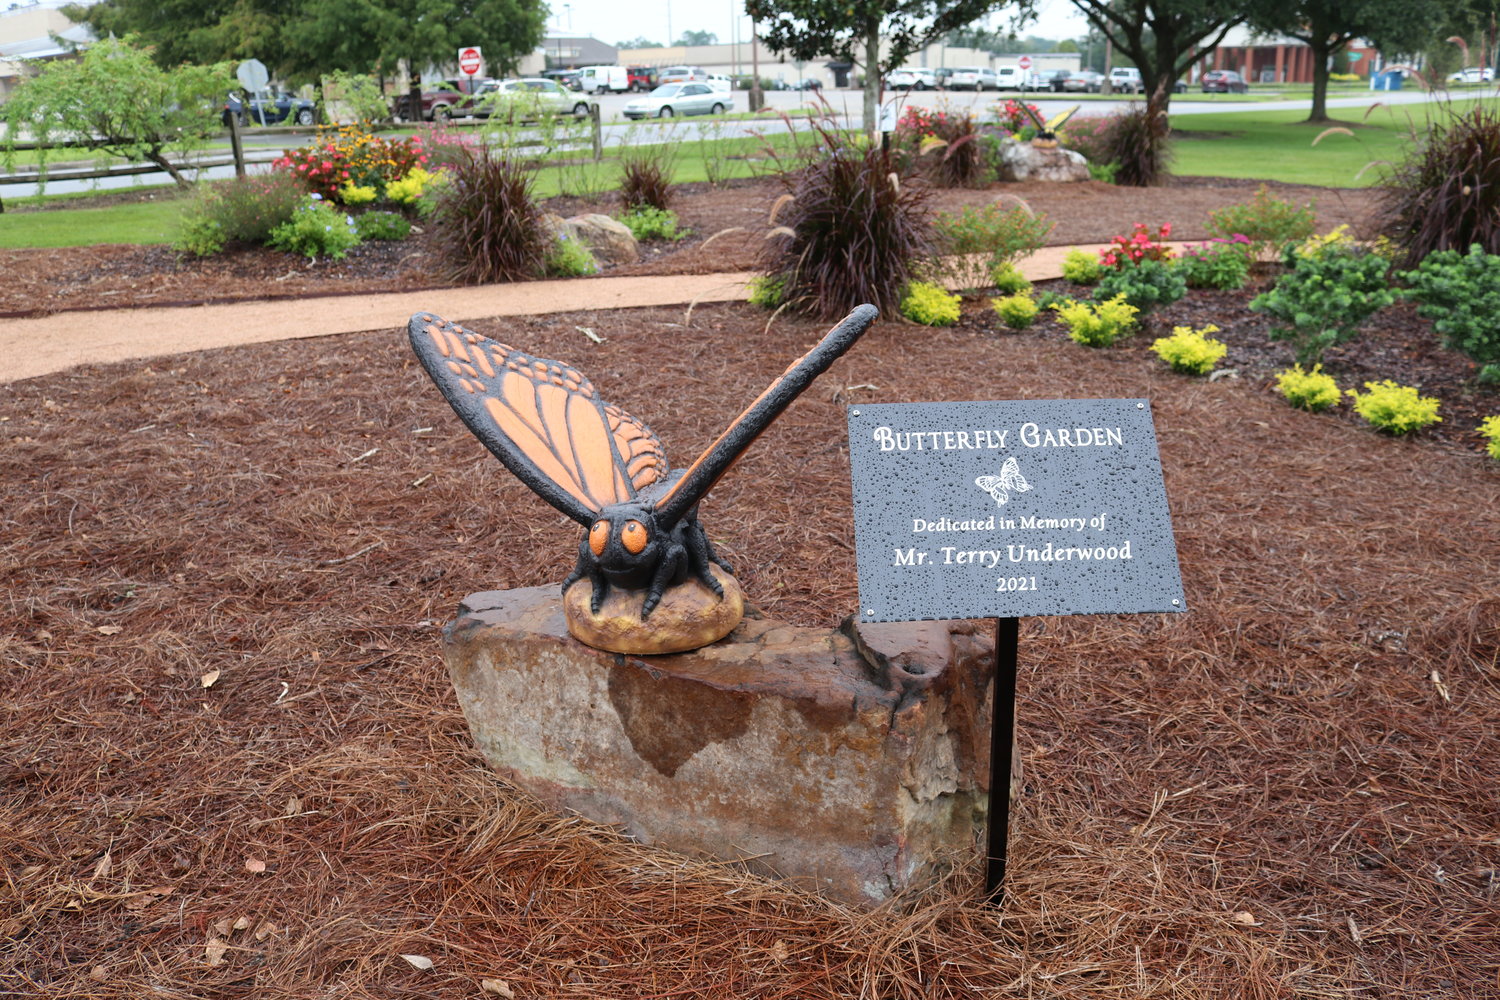 Over the years, the City of Foley has performed many improvement projects on existing parks as well as constructing all new spaces, such as two butterfly gardens along the Rose Trail. Moving forward, the city plans to modernize all city owned parks and is asking for community input on the process.